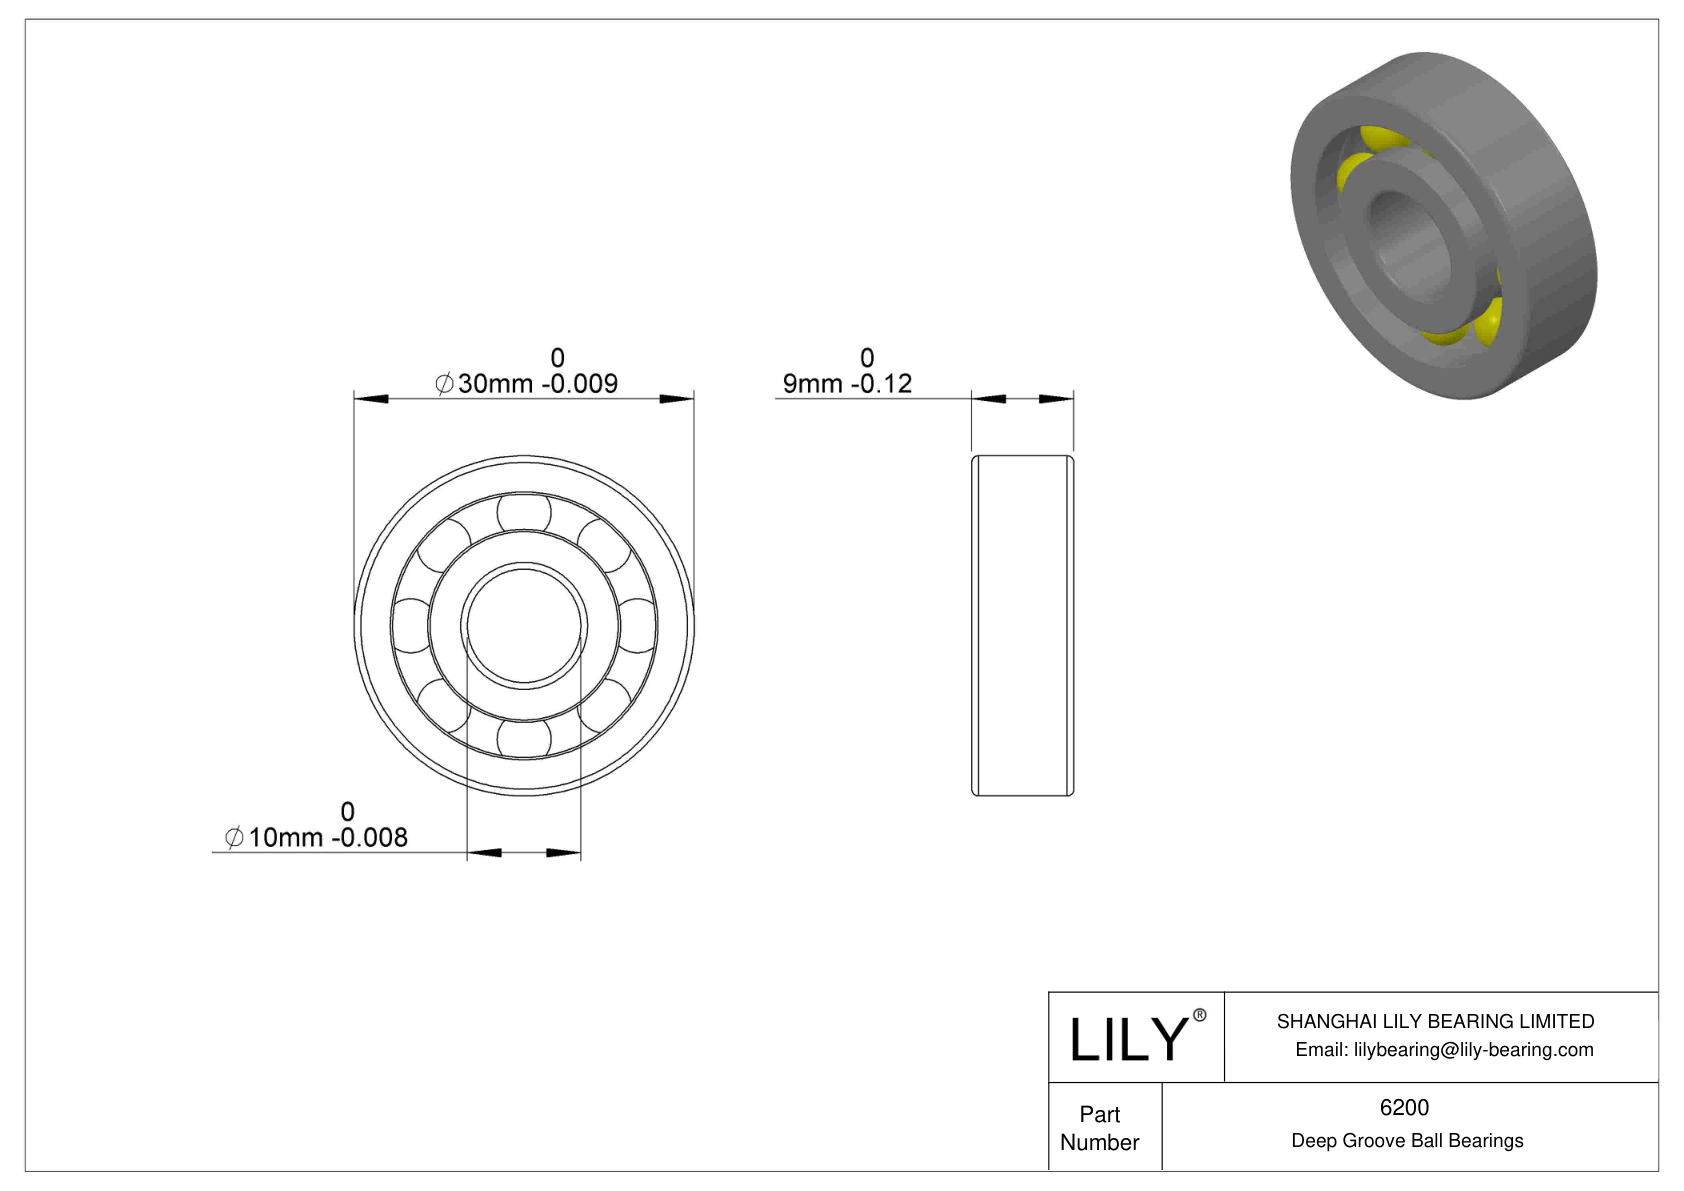 LILY-BS620050-20 POM Coated Bearing cad drawing